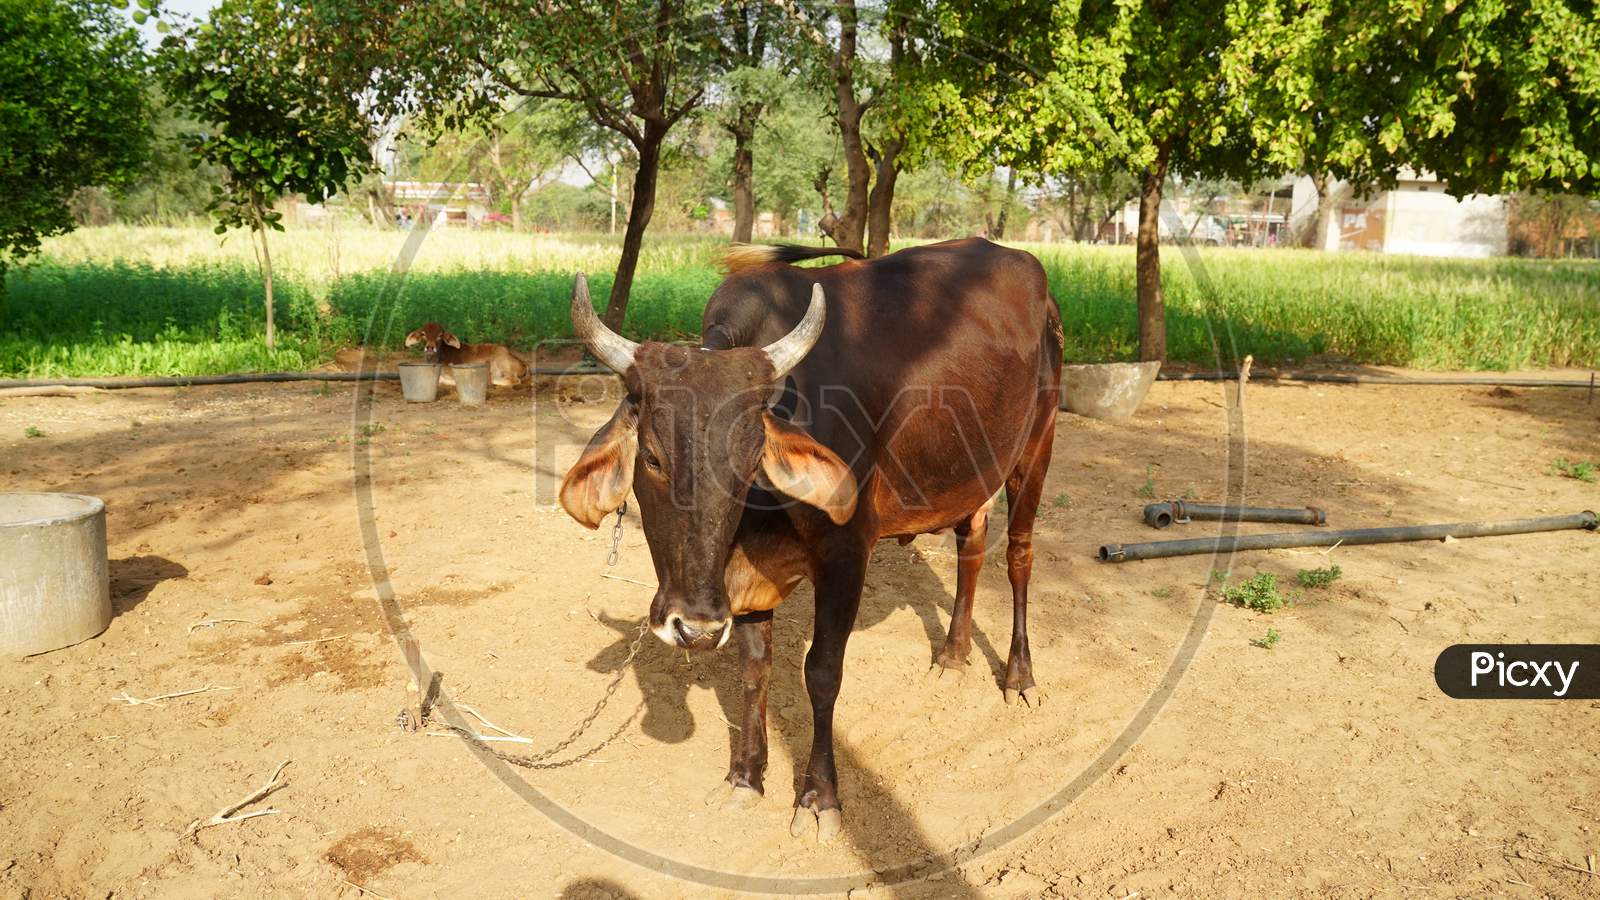 Indian Agriculture And Livestock Industry Concept. Animal Farm Closeup With A Black Cow In Sunlight.